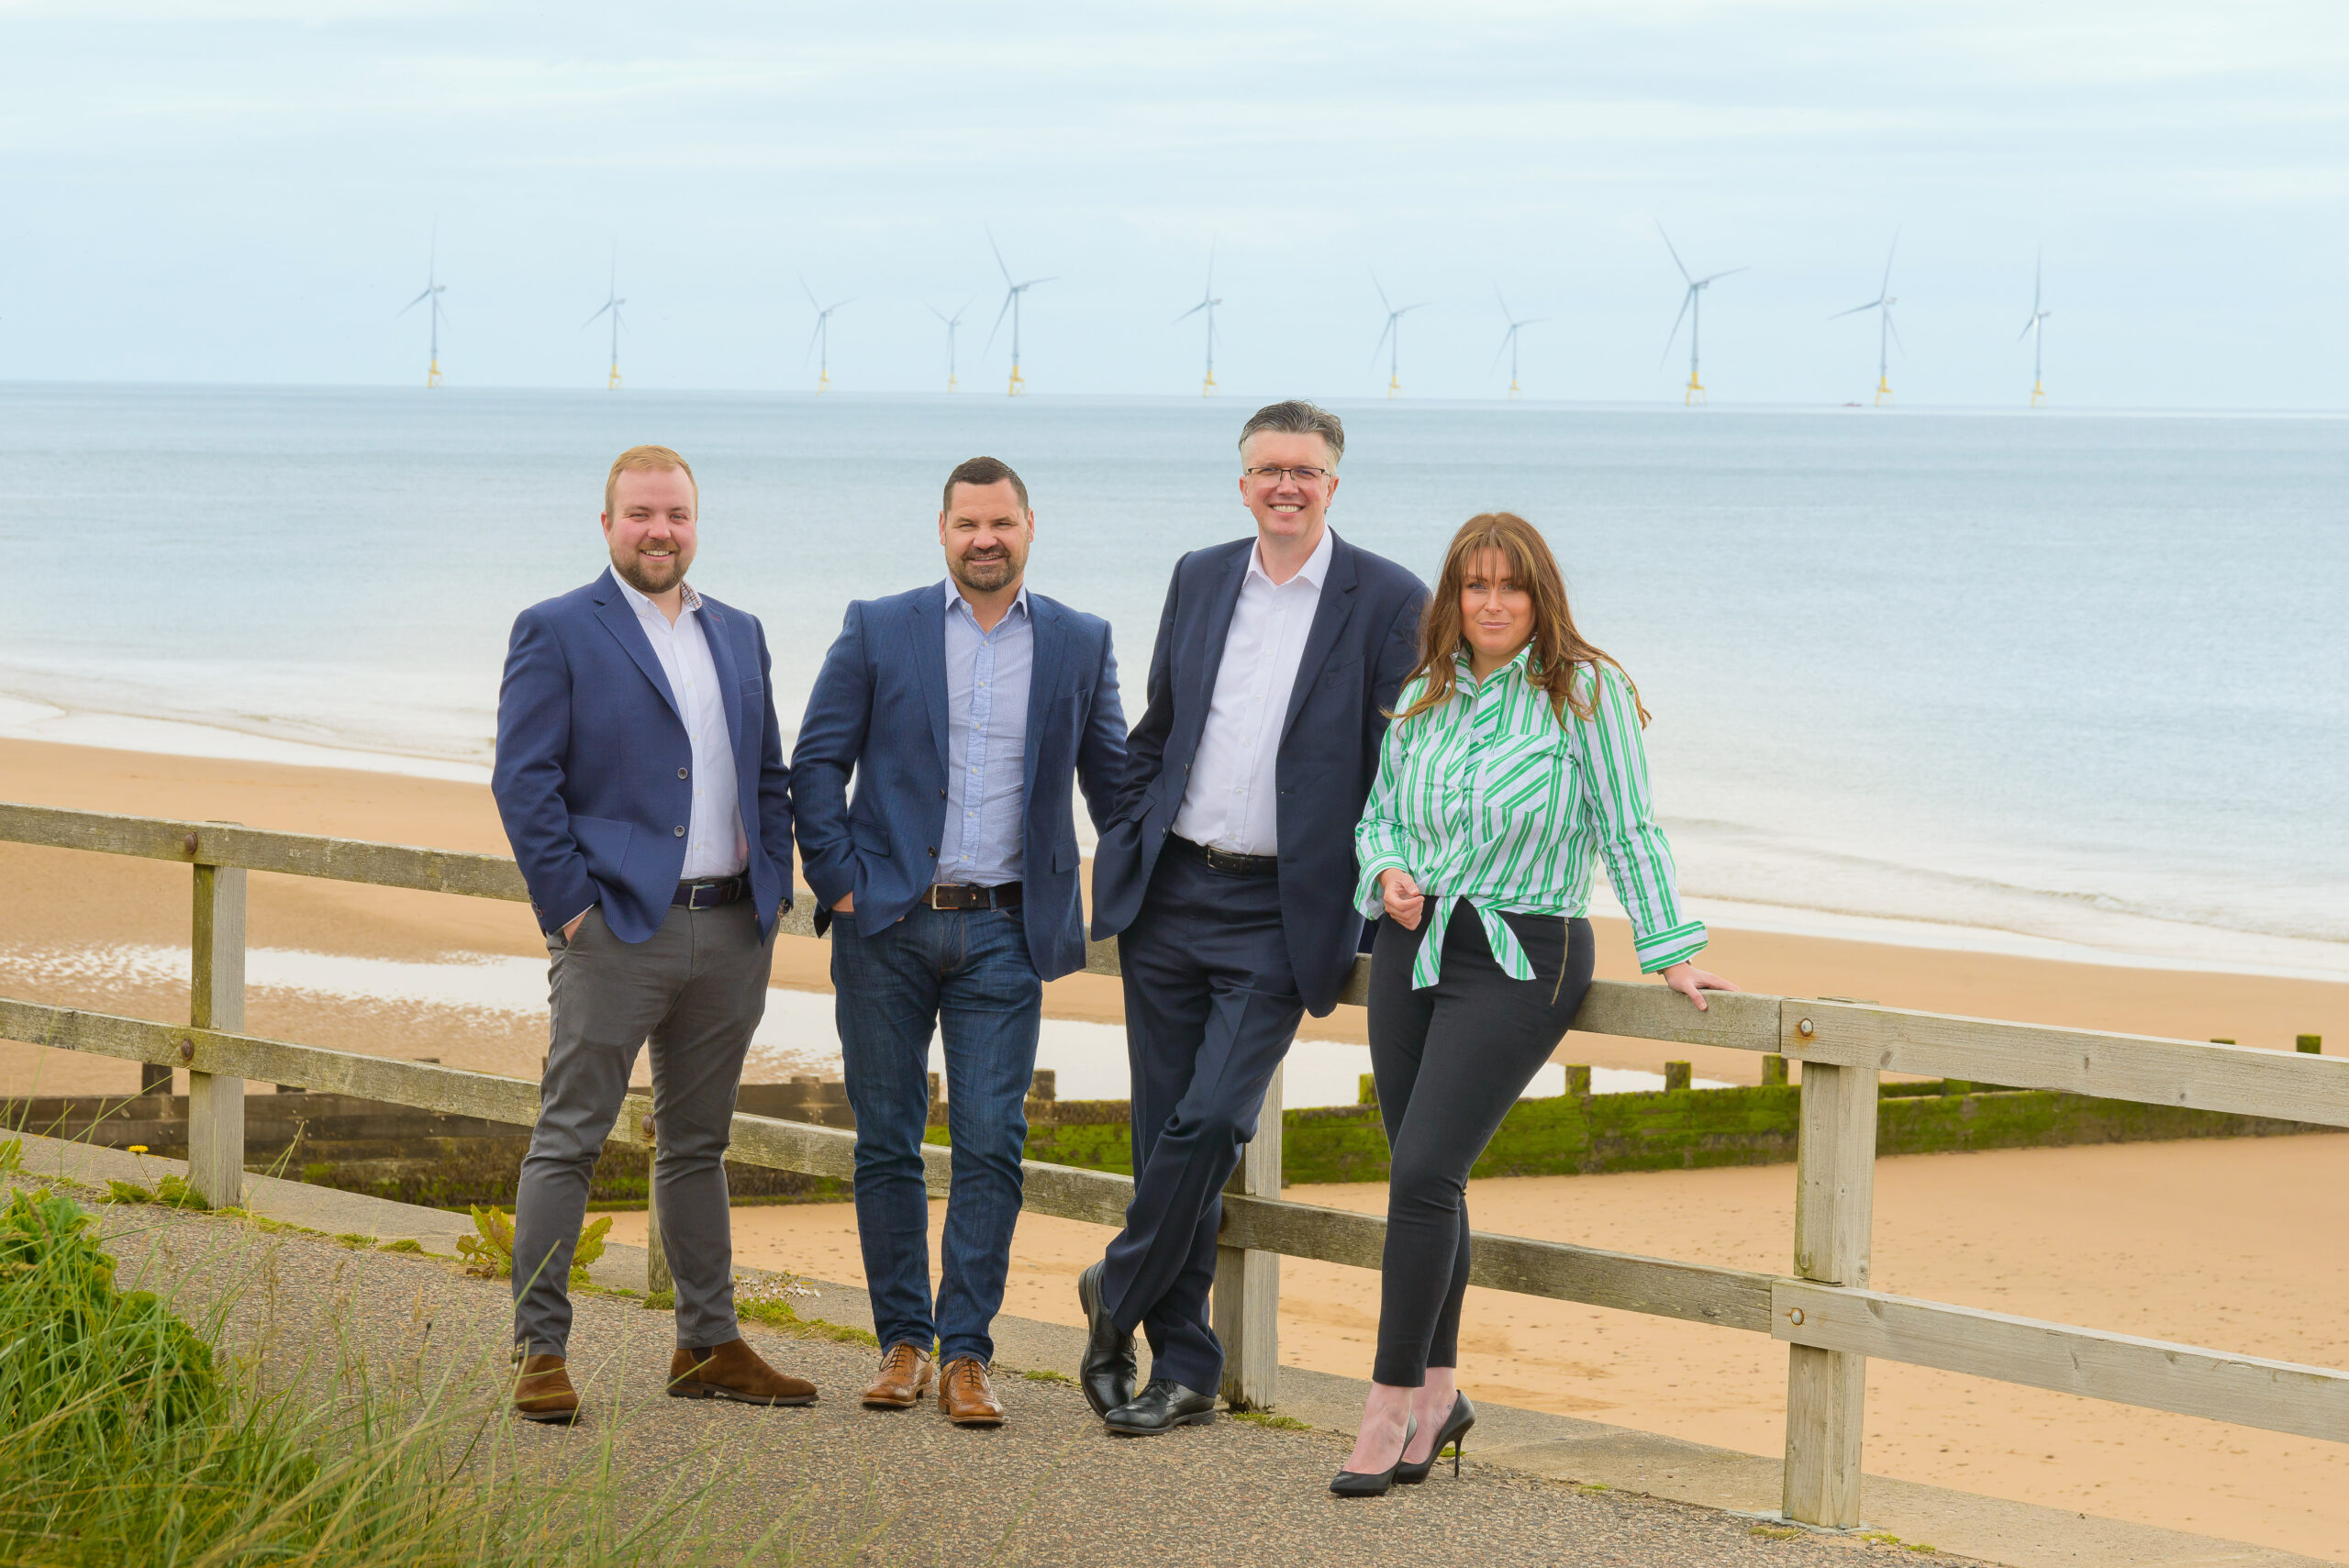 MEMBER NEWS: Coast Renewable Services and Peterson Energy Logistics to form offshore-wind focused joint venture